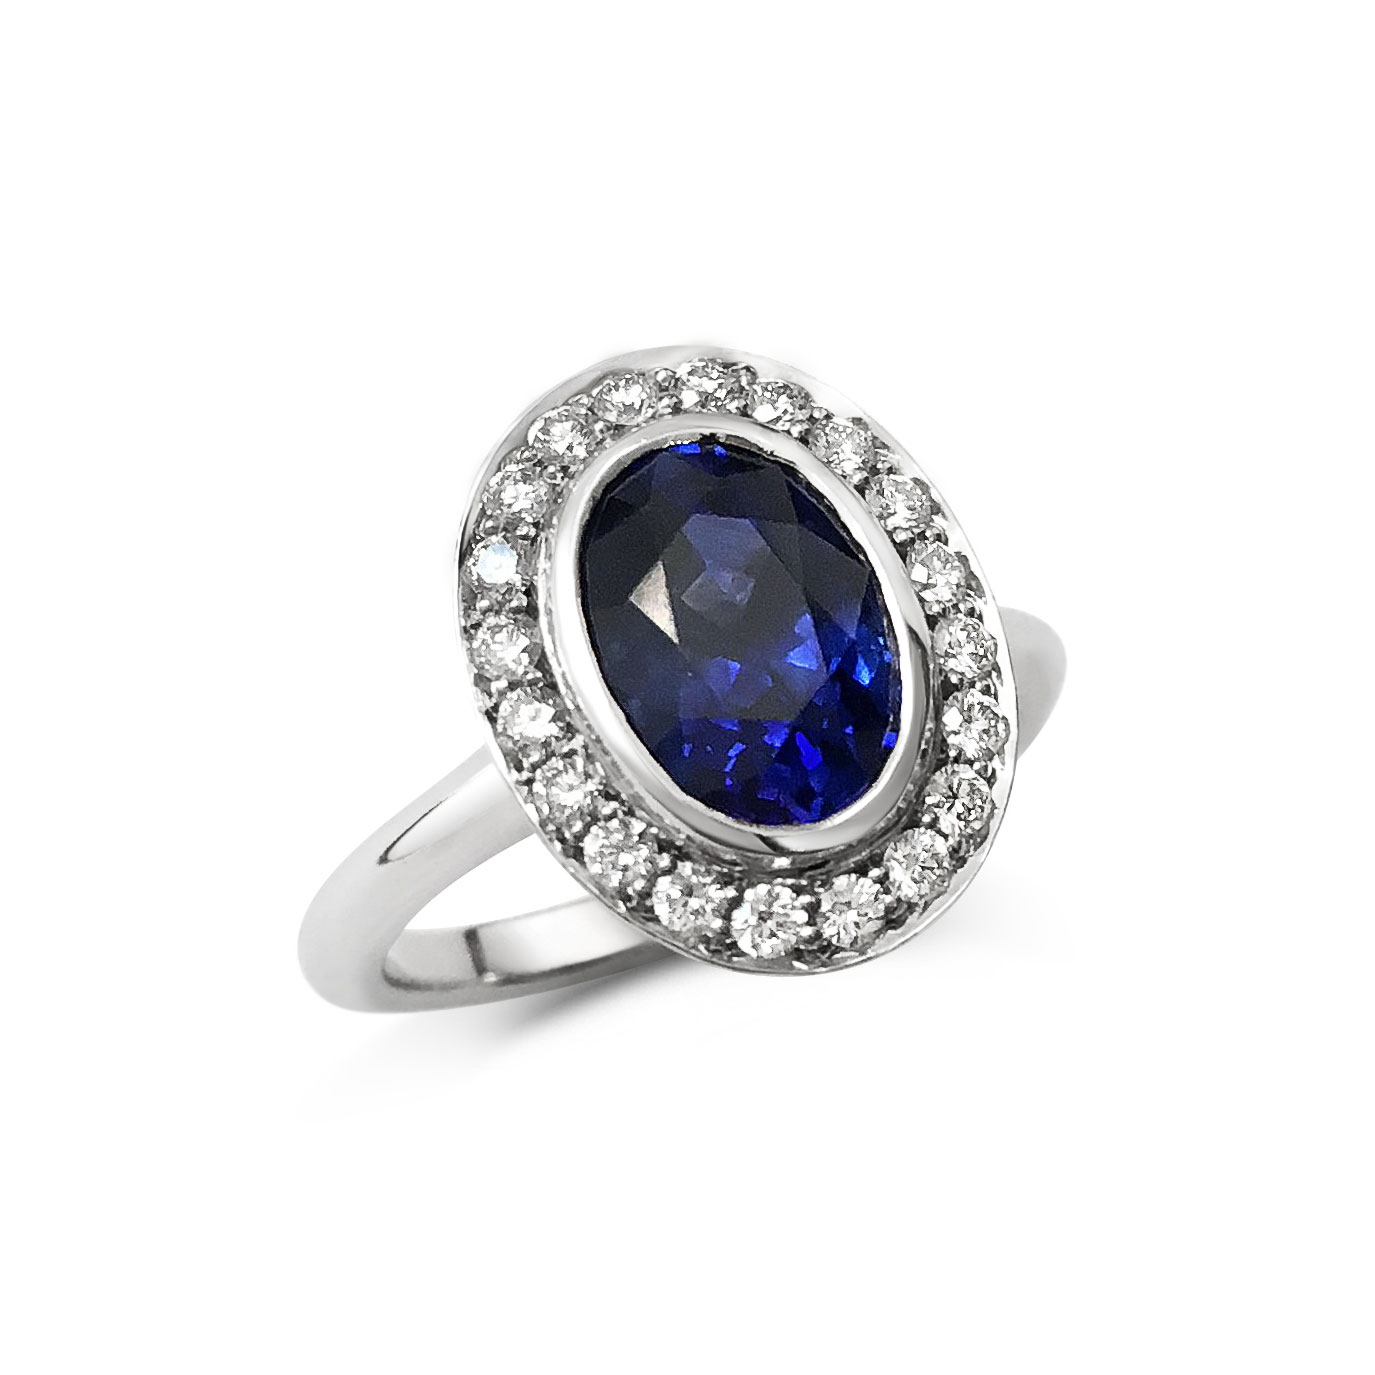 Oval sapphire with diamond halo engagement ring, mounted in platinum. 